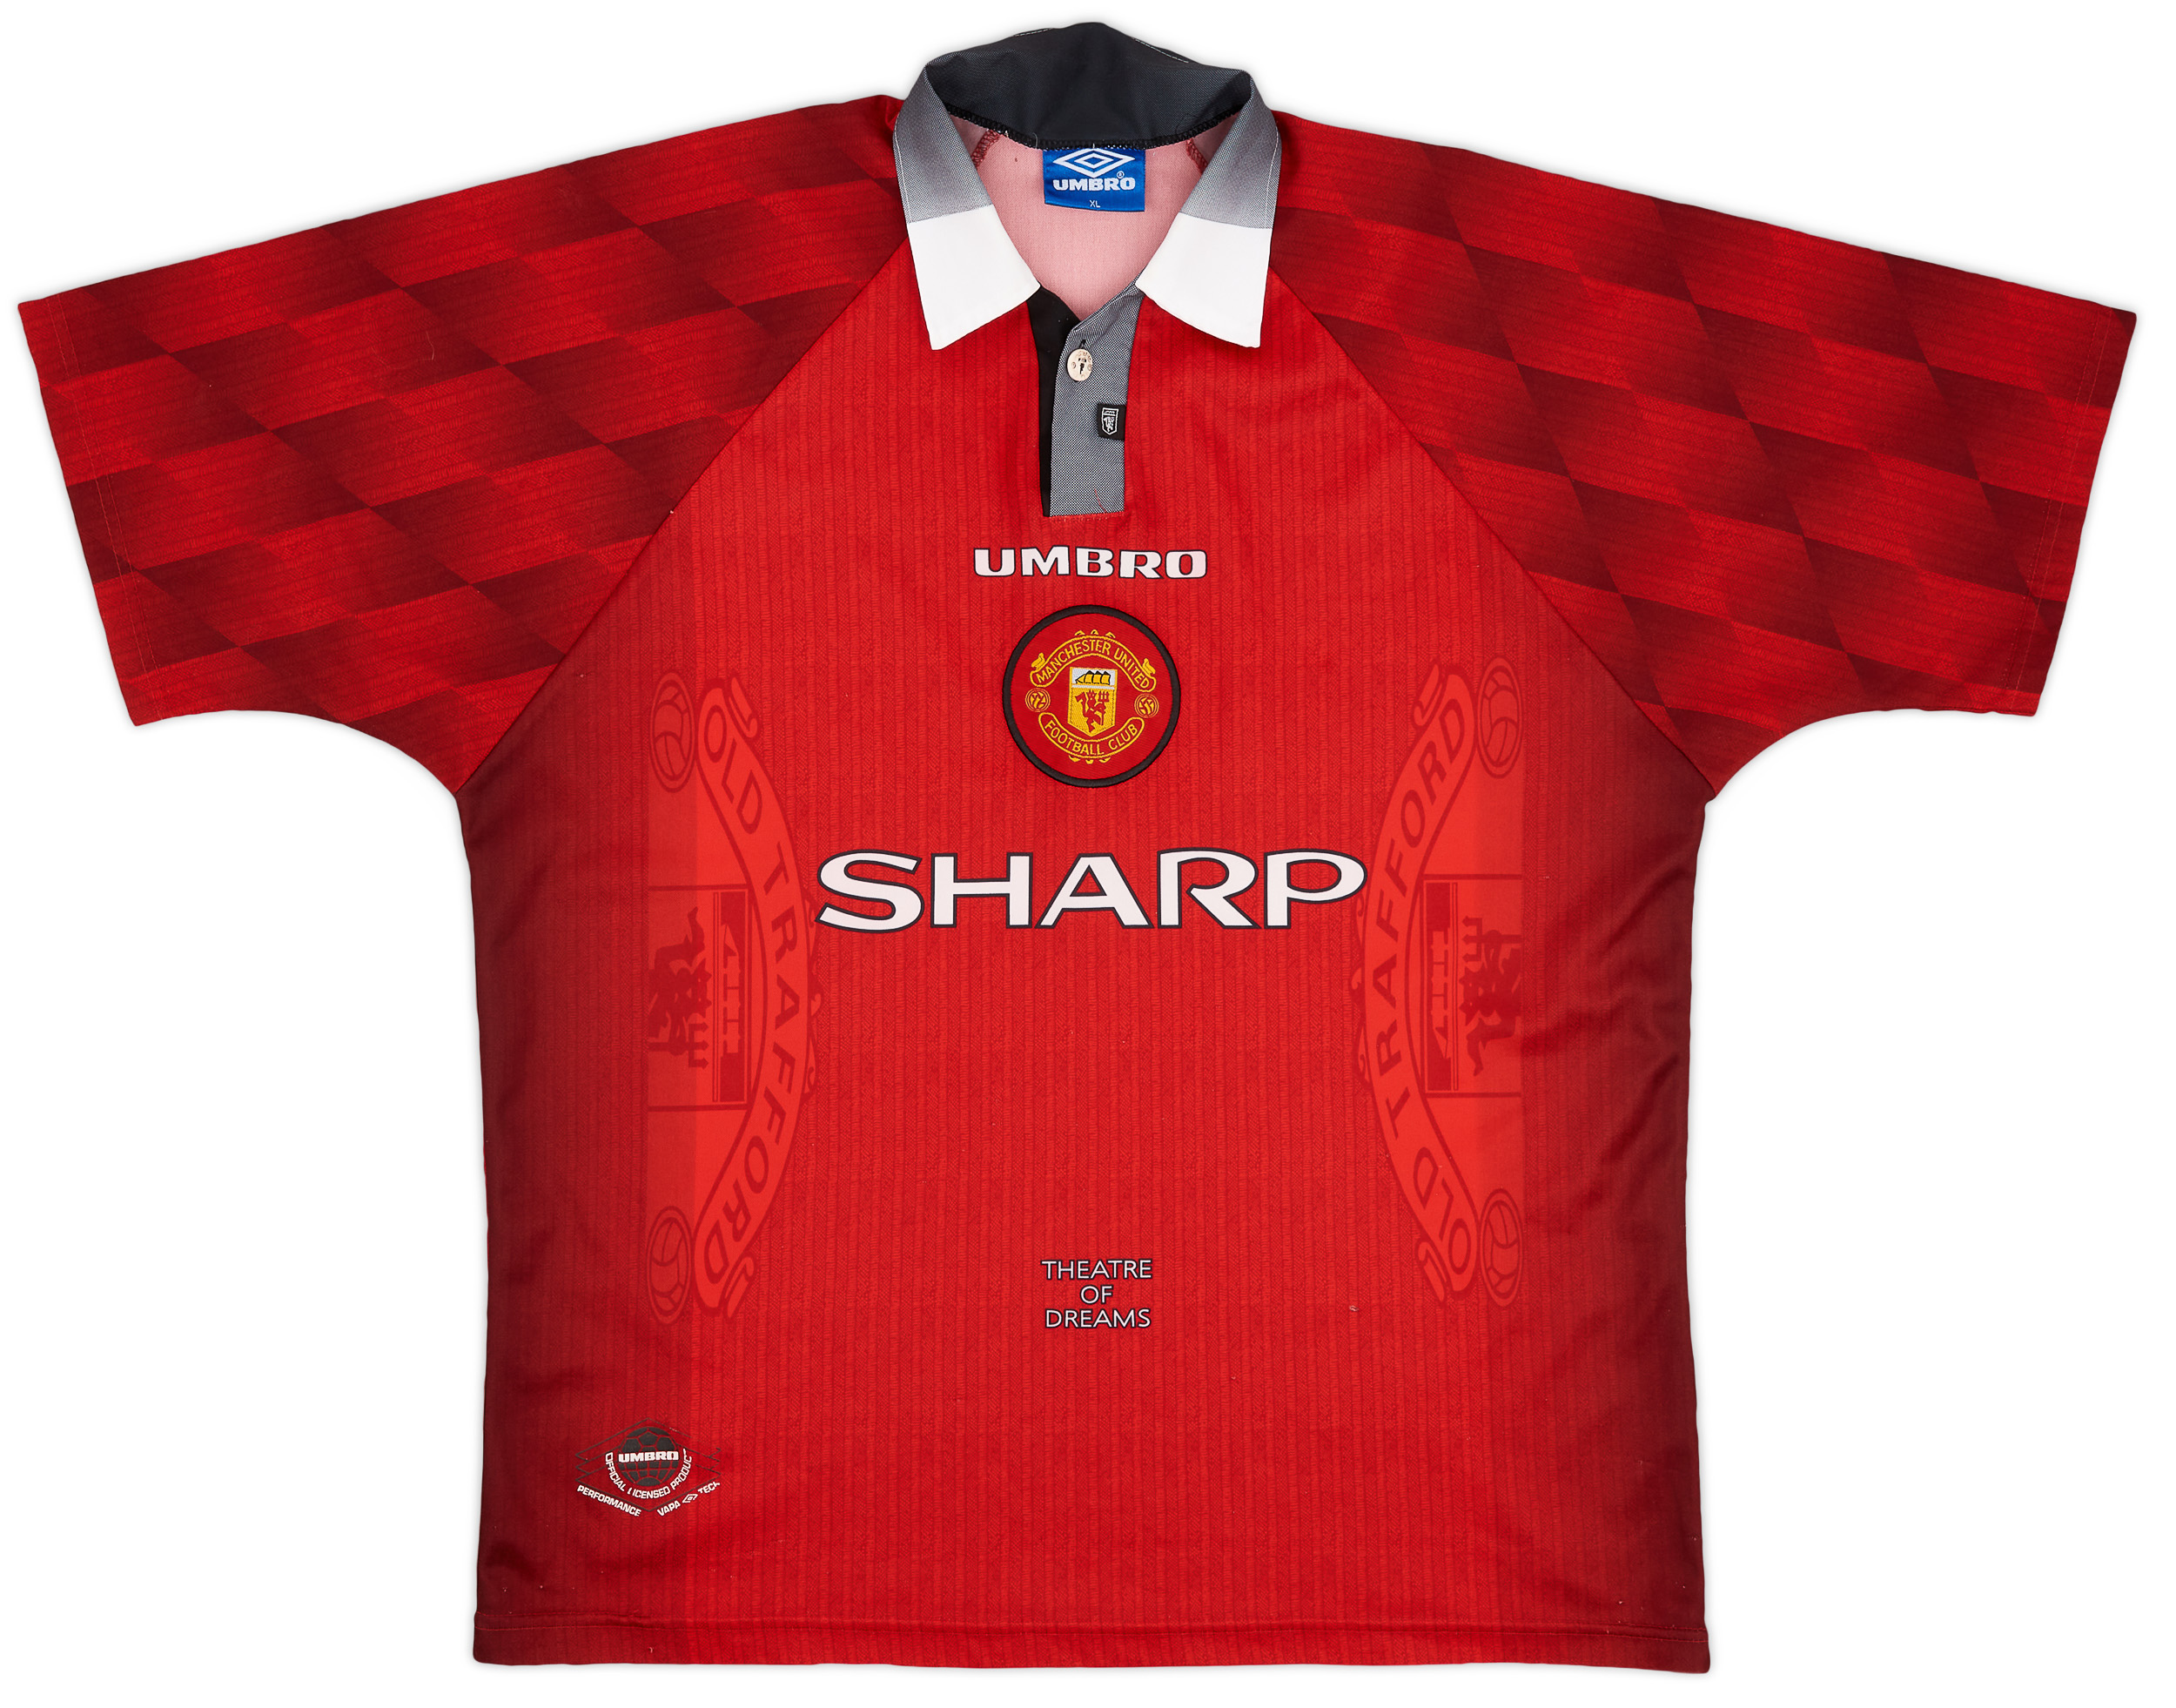 1996-98 Manchester United Home Shirt - 5/10 - ()